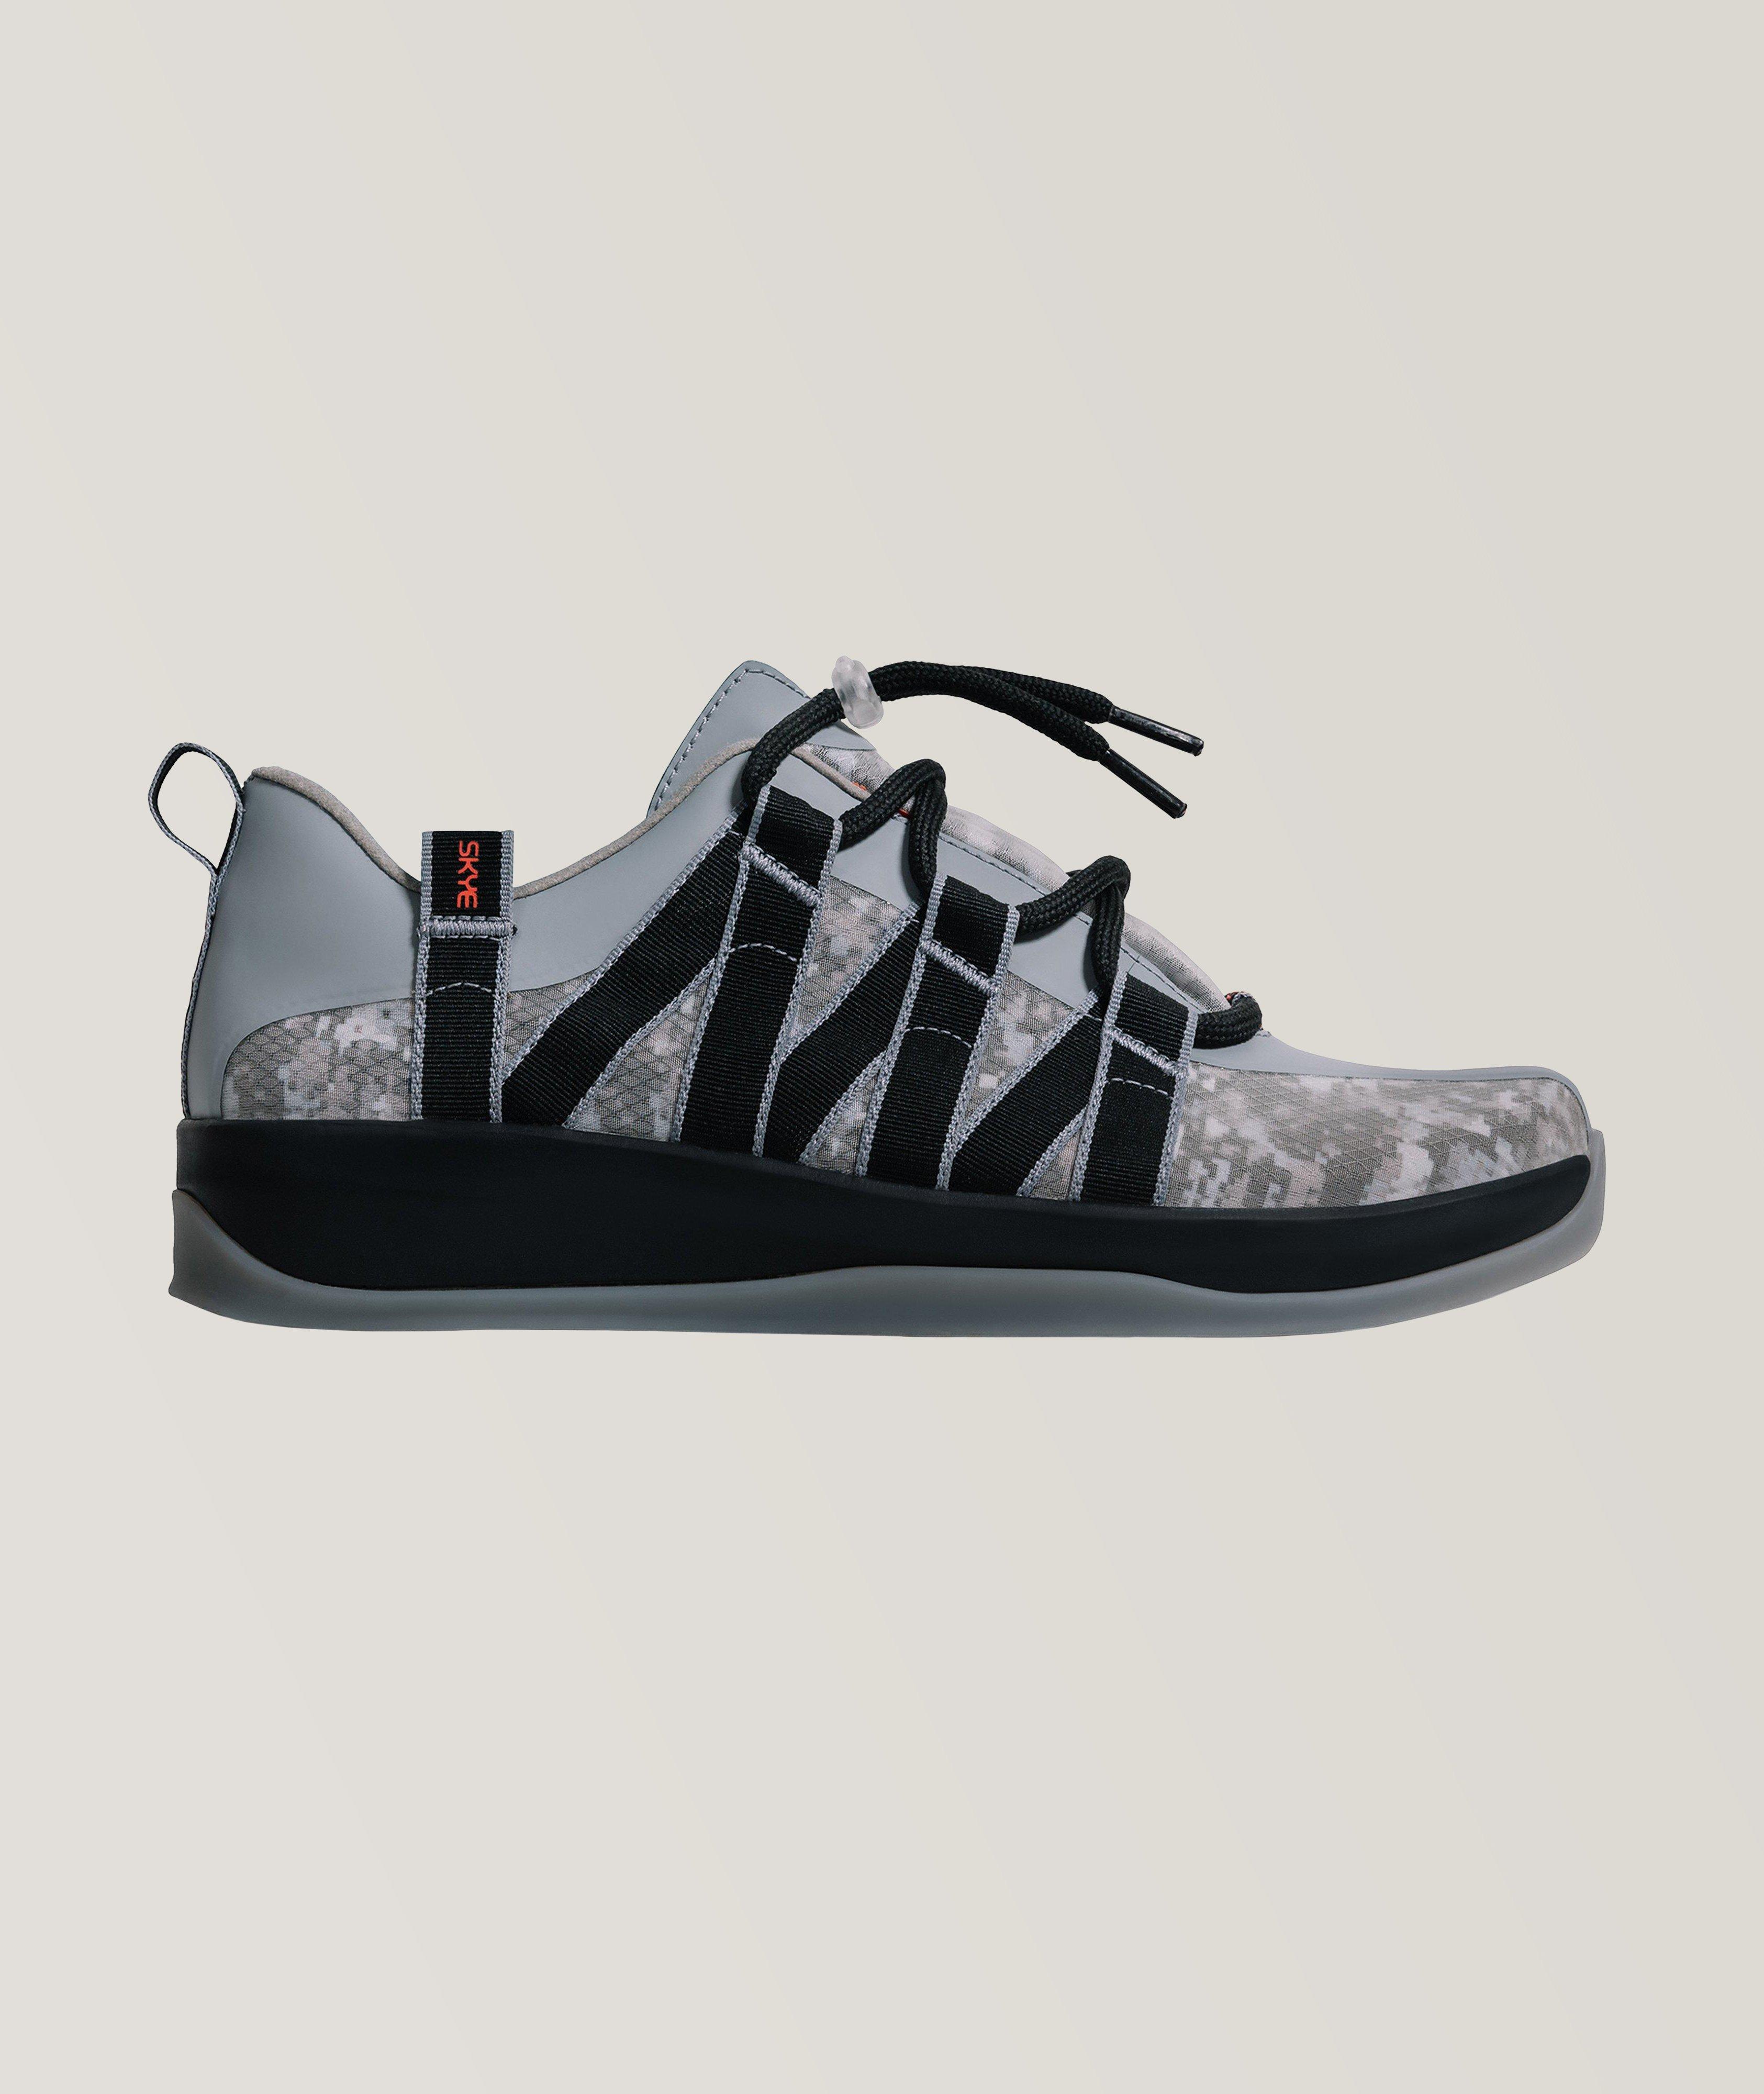 Mobrly 2.0 Sneakers  image 0